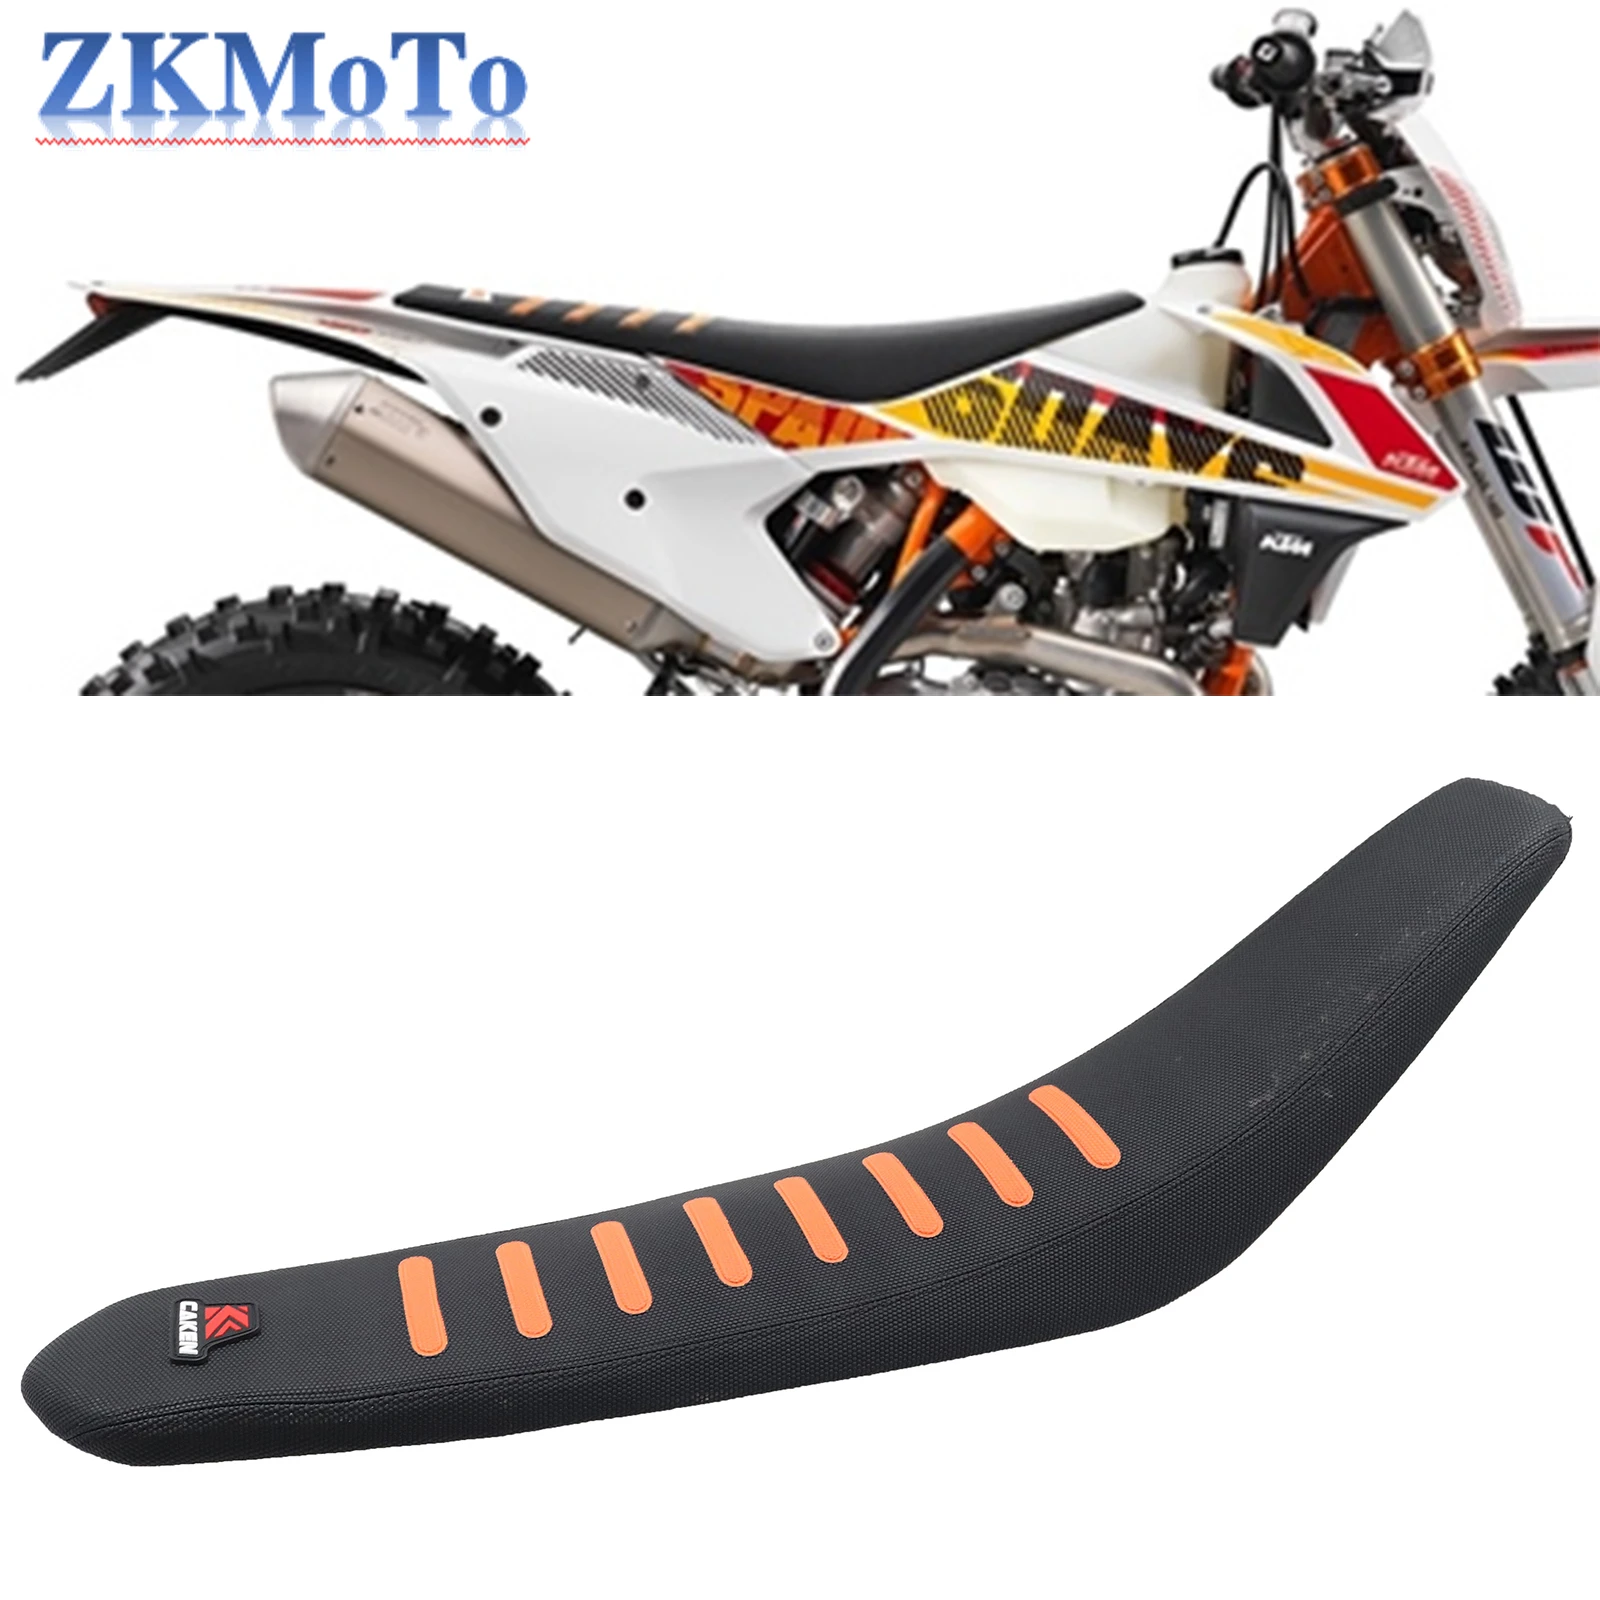 

Motocross Bench Seat 30mm Lower Than Original For KTM EXC EXCF SX SXF XC XCF XCW XCFW 125-500 20-22 Enduro Motorcycle Seat Bench